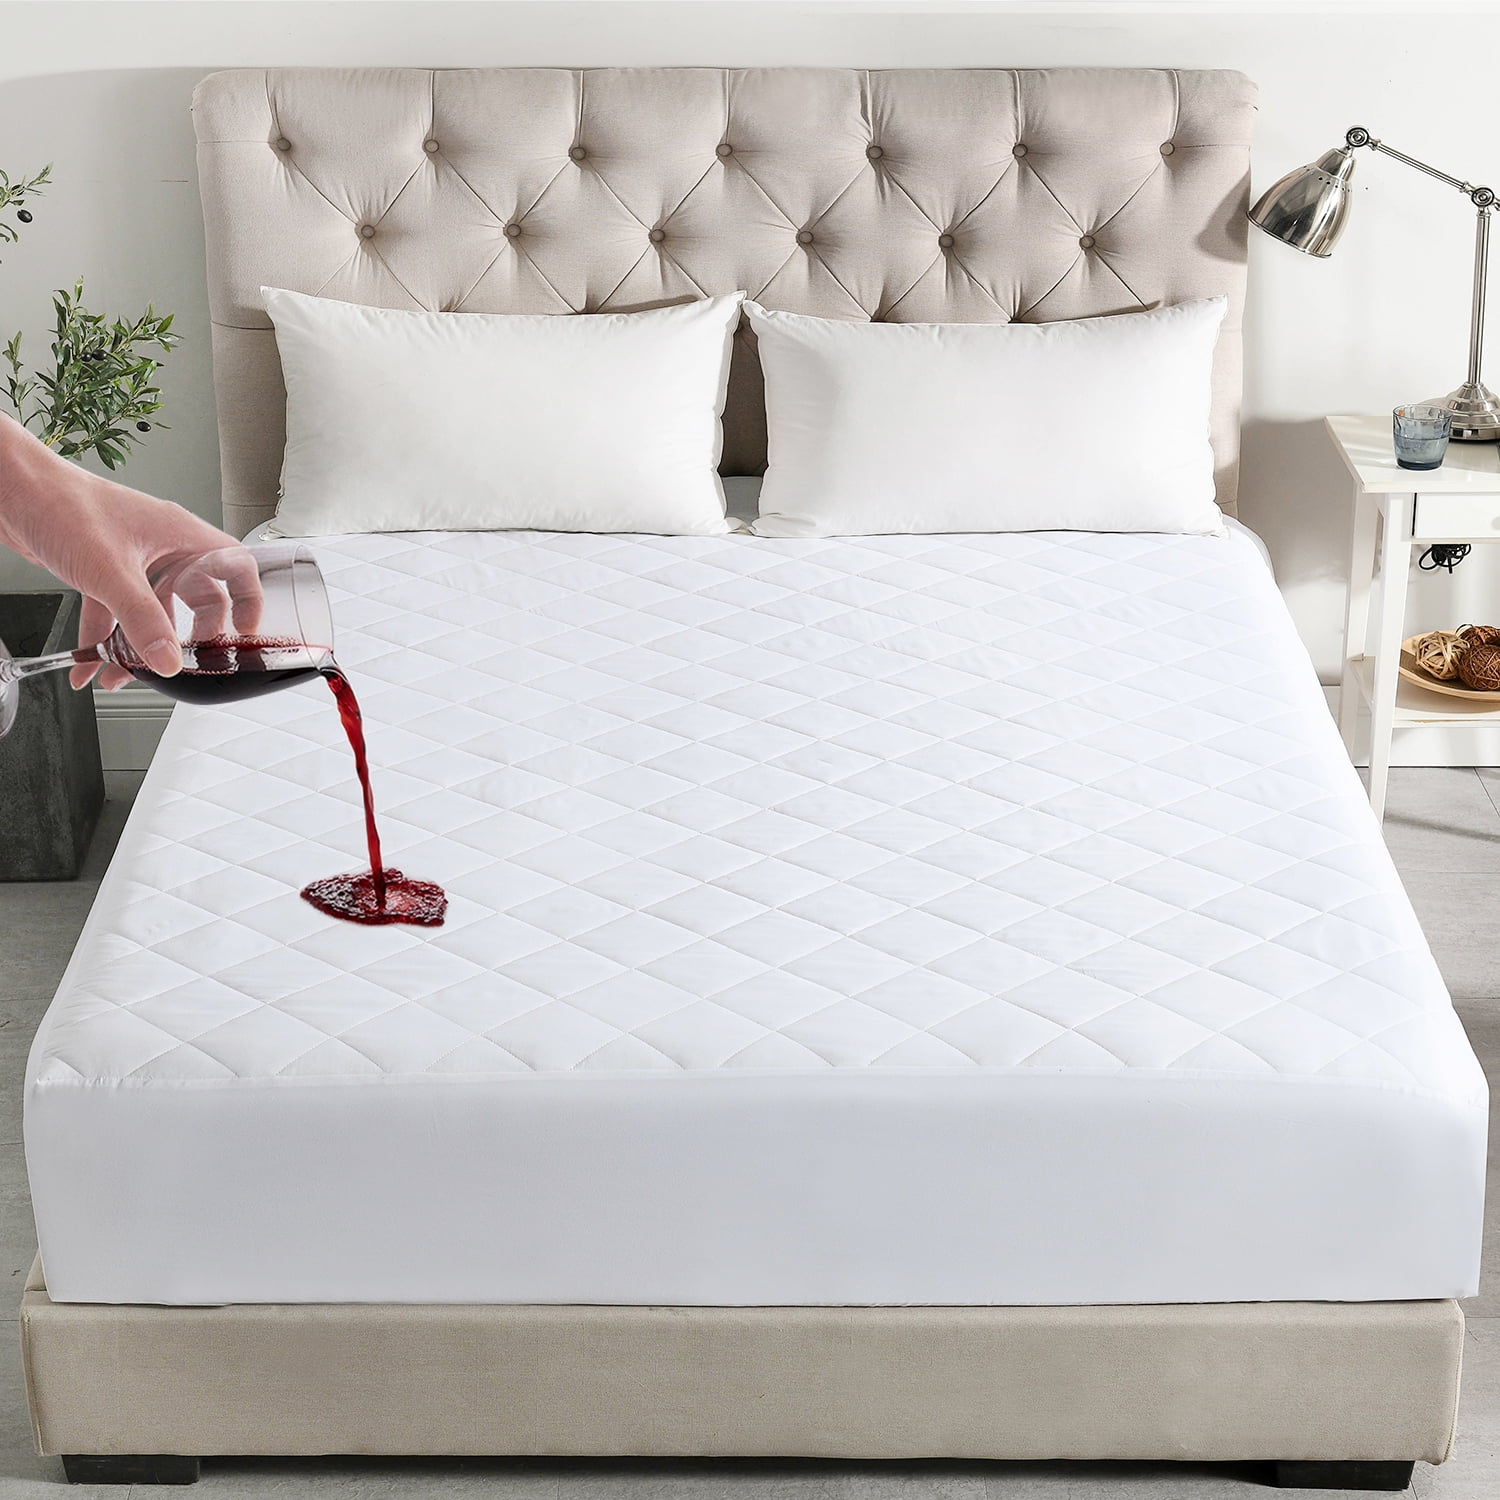 NEW EXTRA DEEP QUILTED MATTRESS MATTRESS PROTECTOR FITTED BED COVER:ALL SIZES